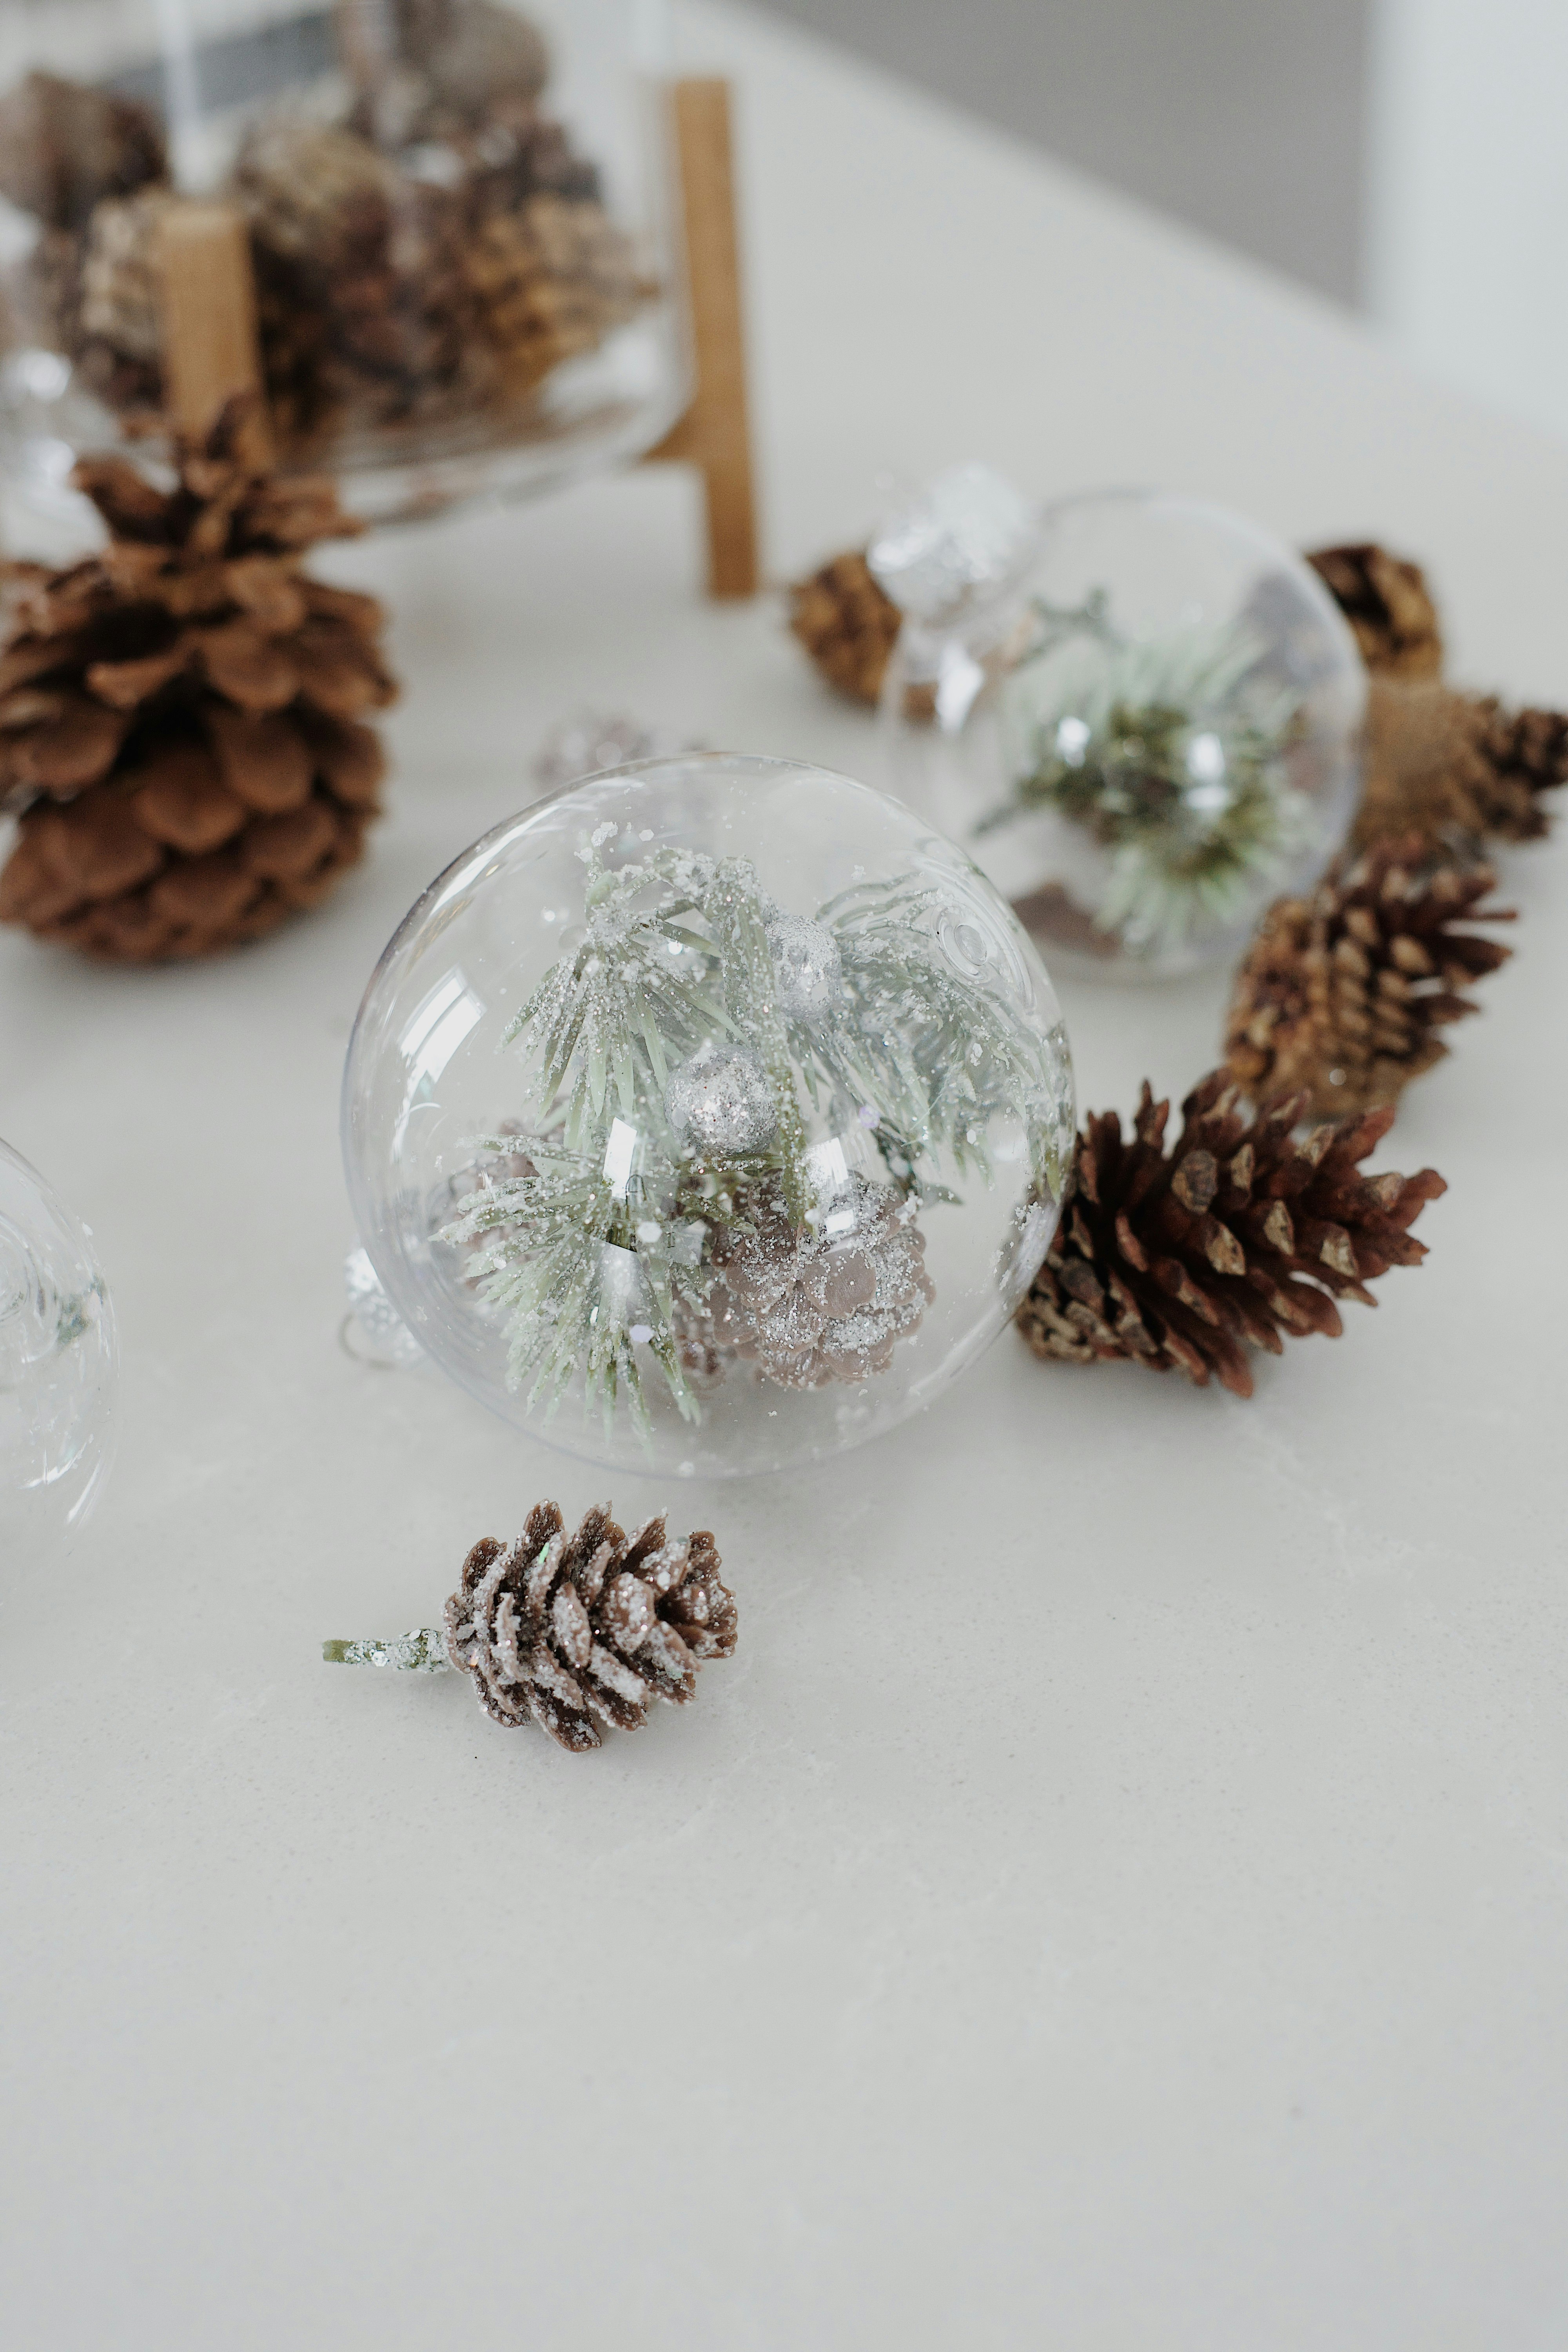 clear glass ball on white table